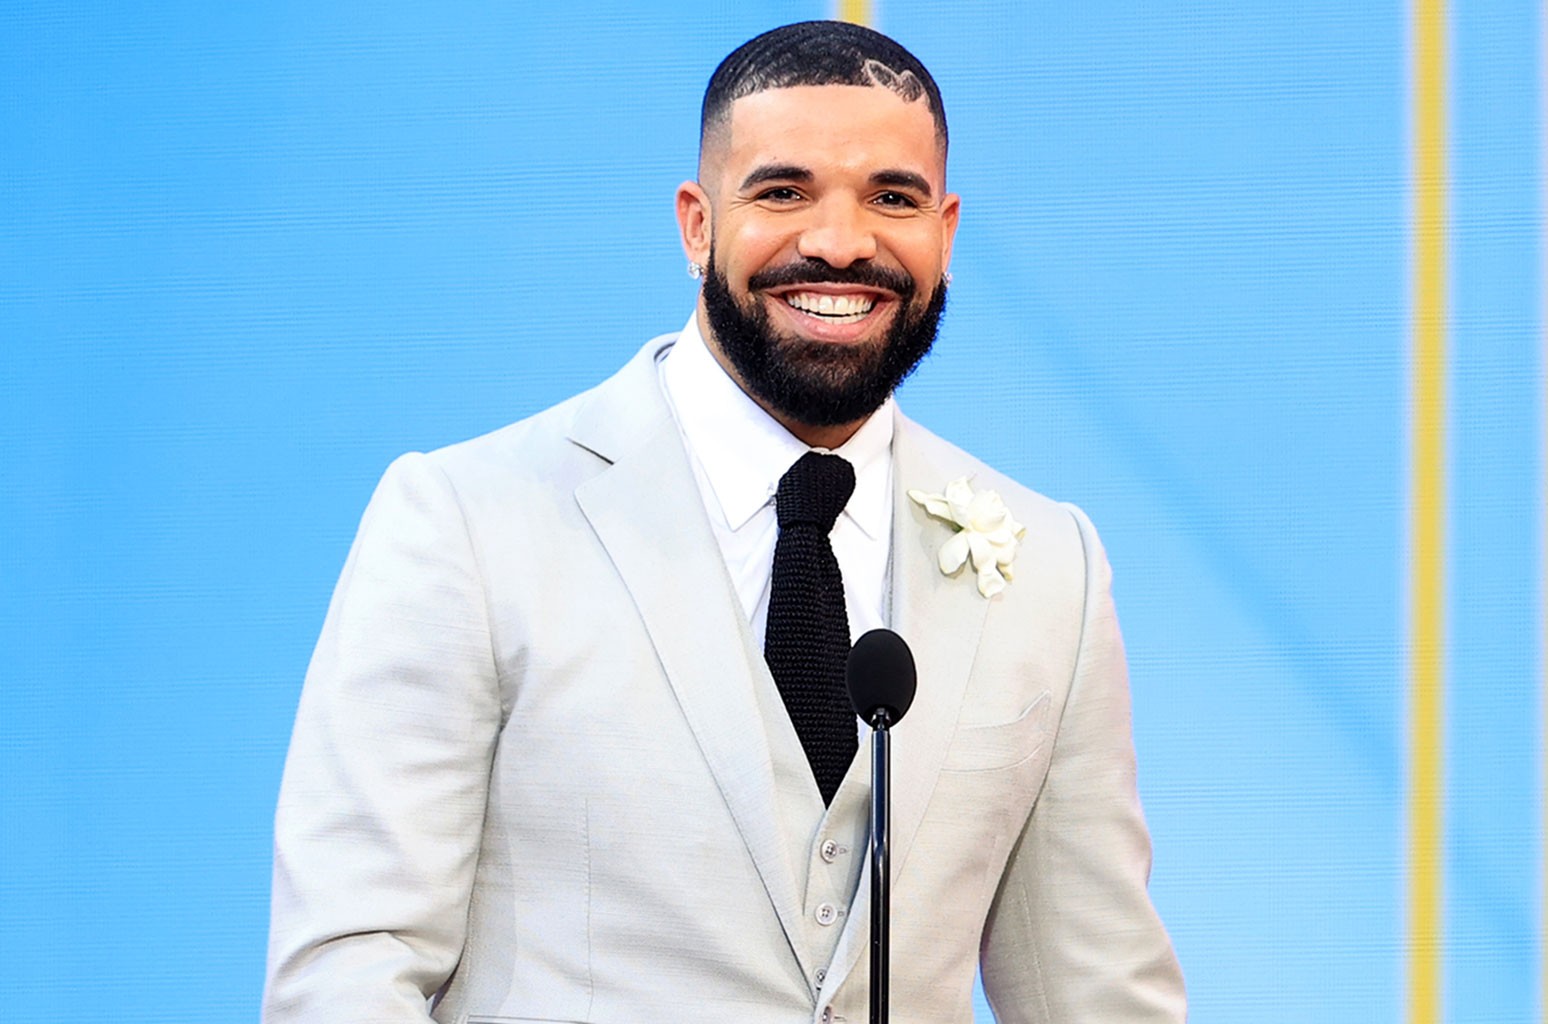 Drake accused of having a handler to seek out women to provide sexual services